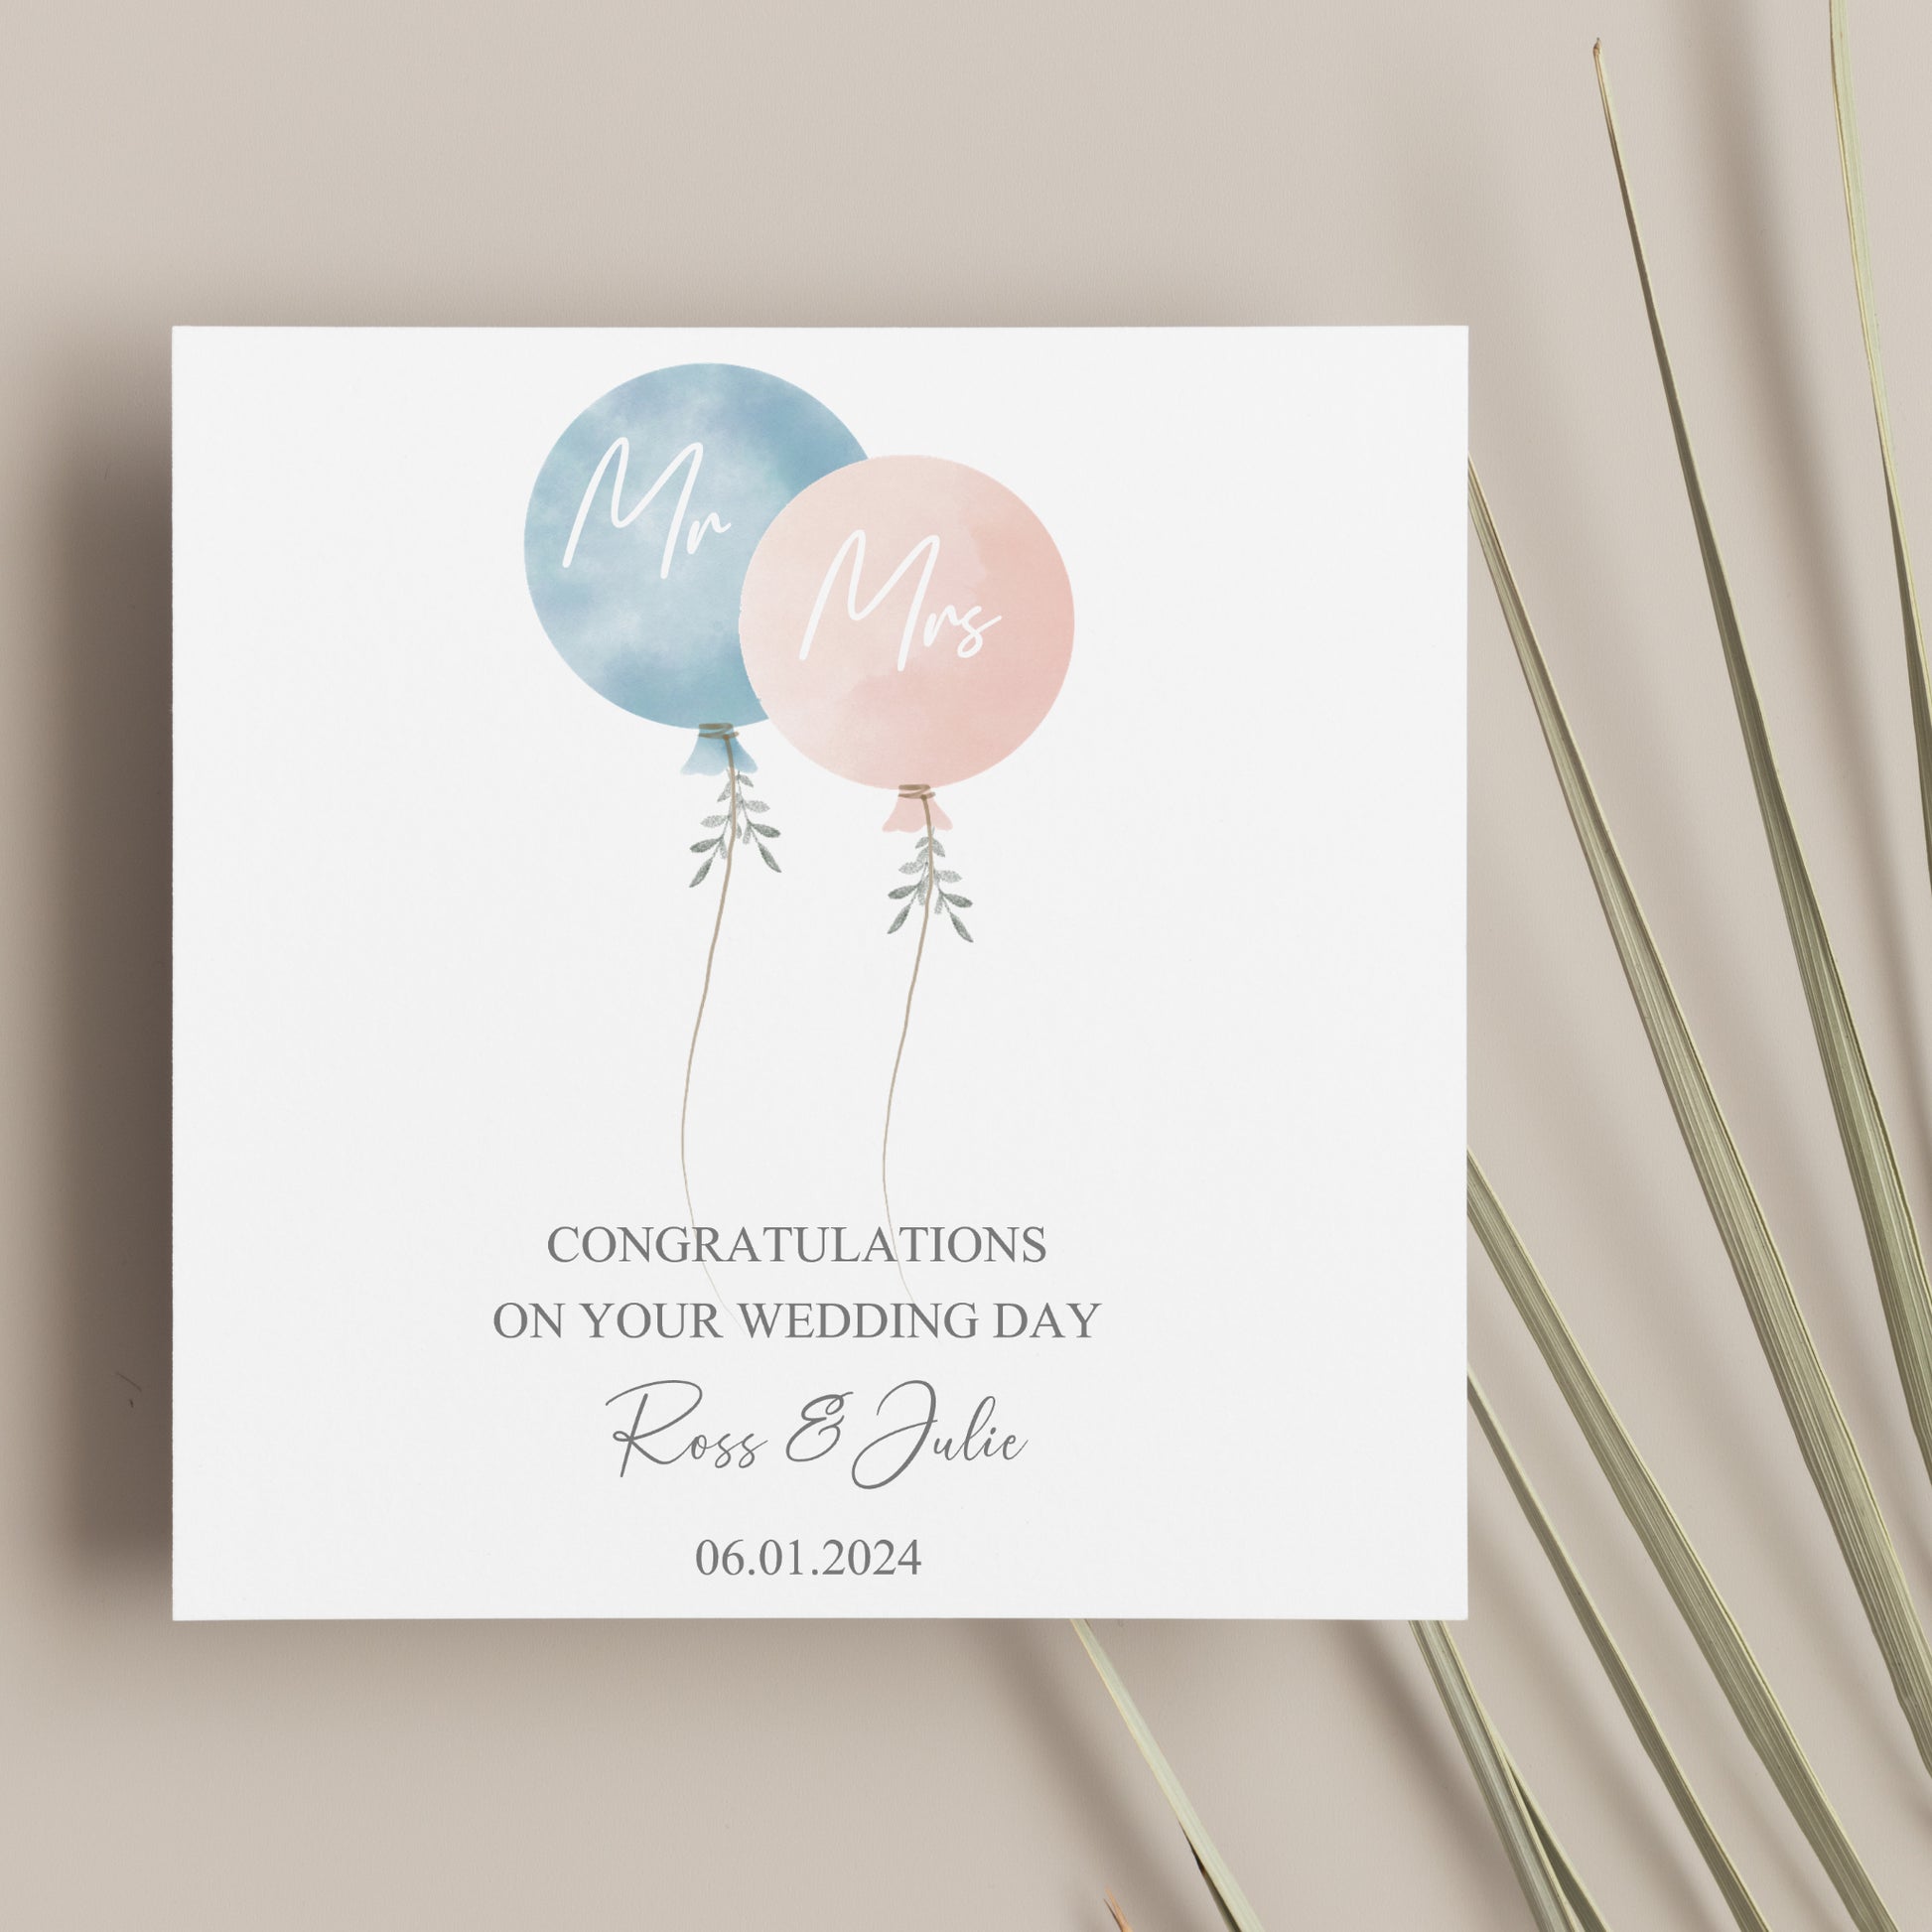 a couple of balloons on top of a card